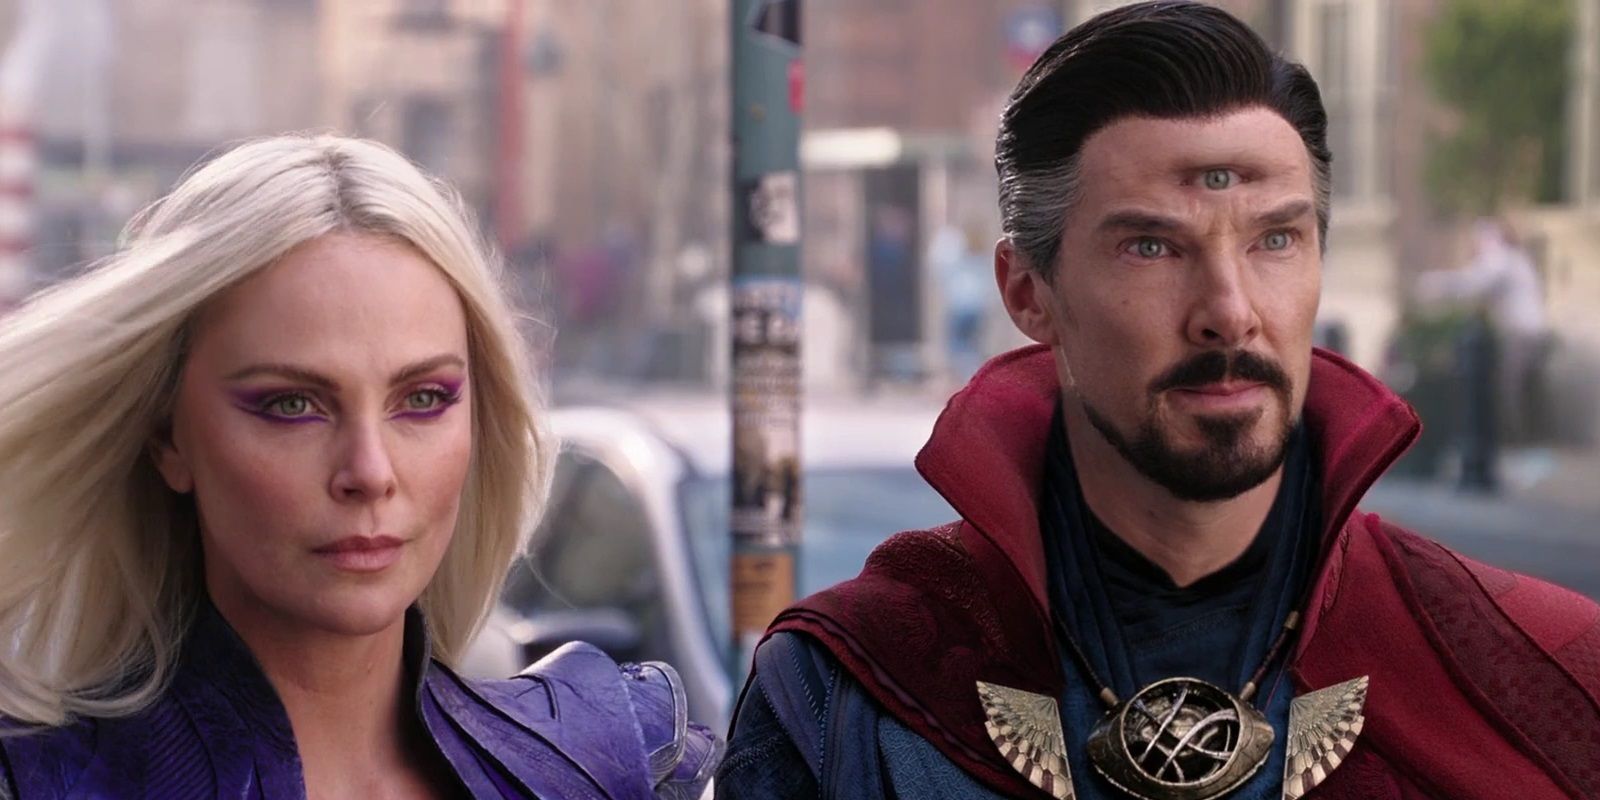 Strange_and_Clea_in_the_mid-credits_scene_of_Doctor_Strange_in_the_Multiverse_of_Madness